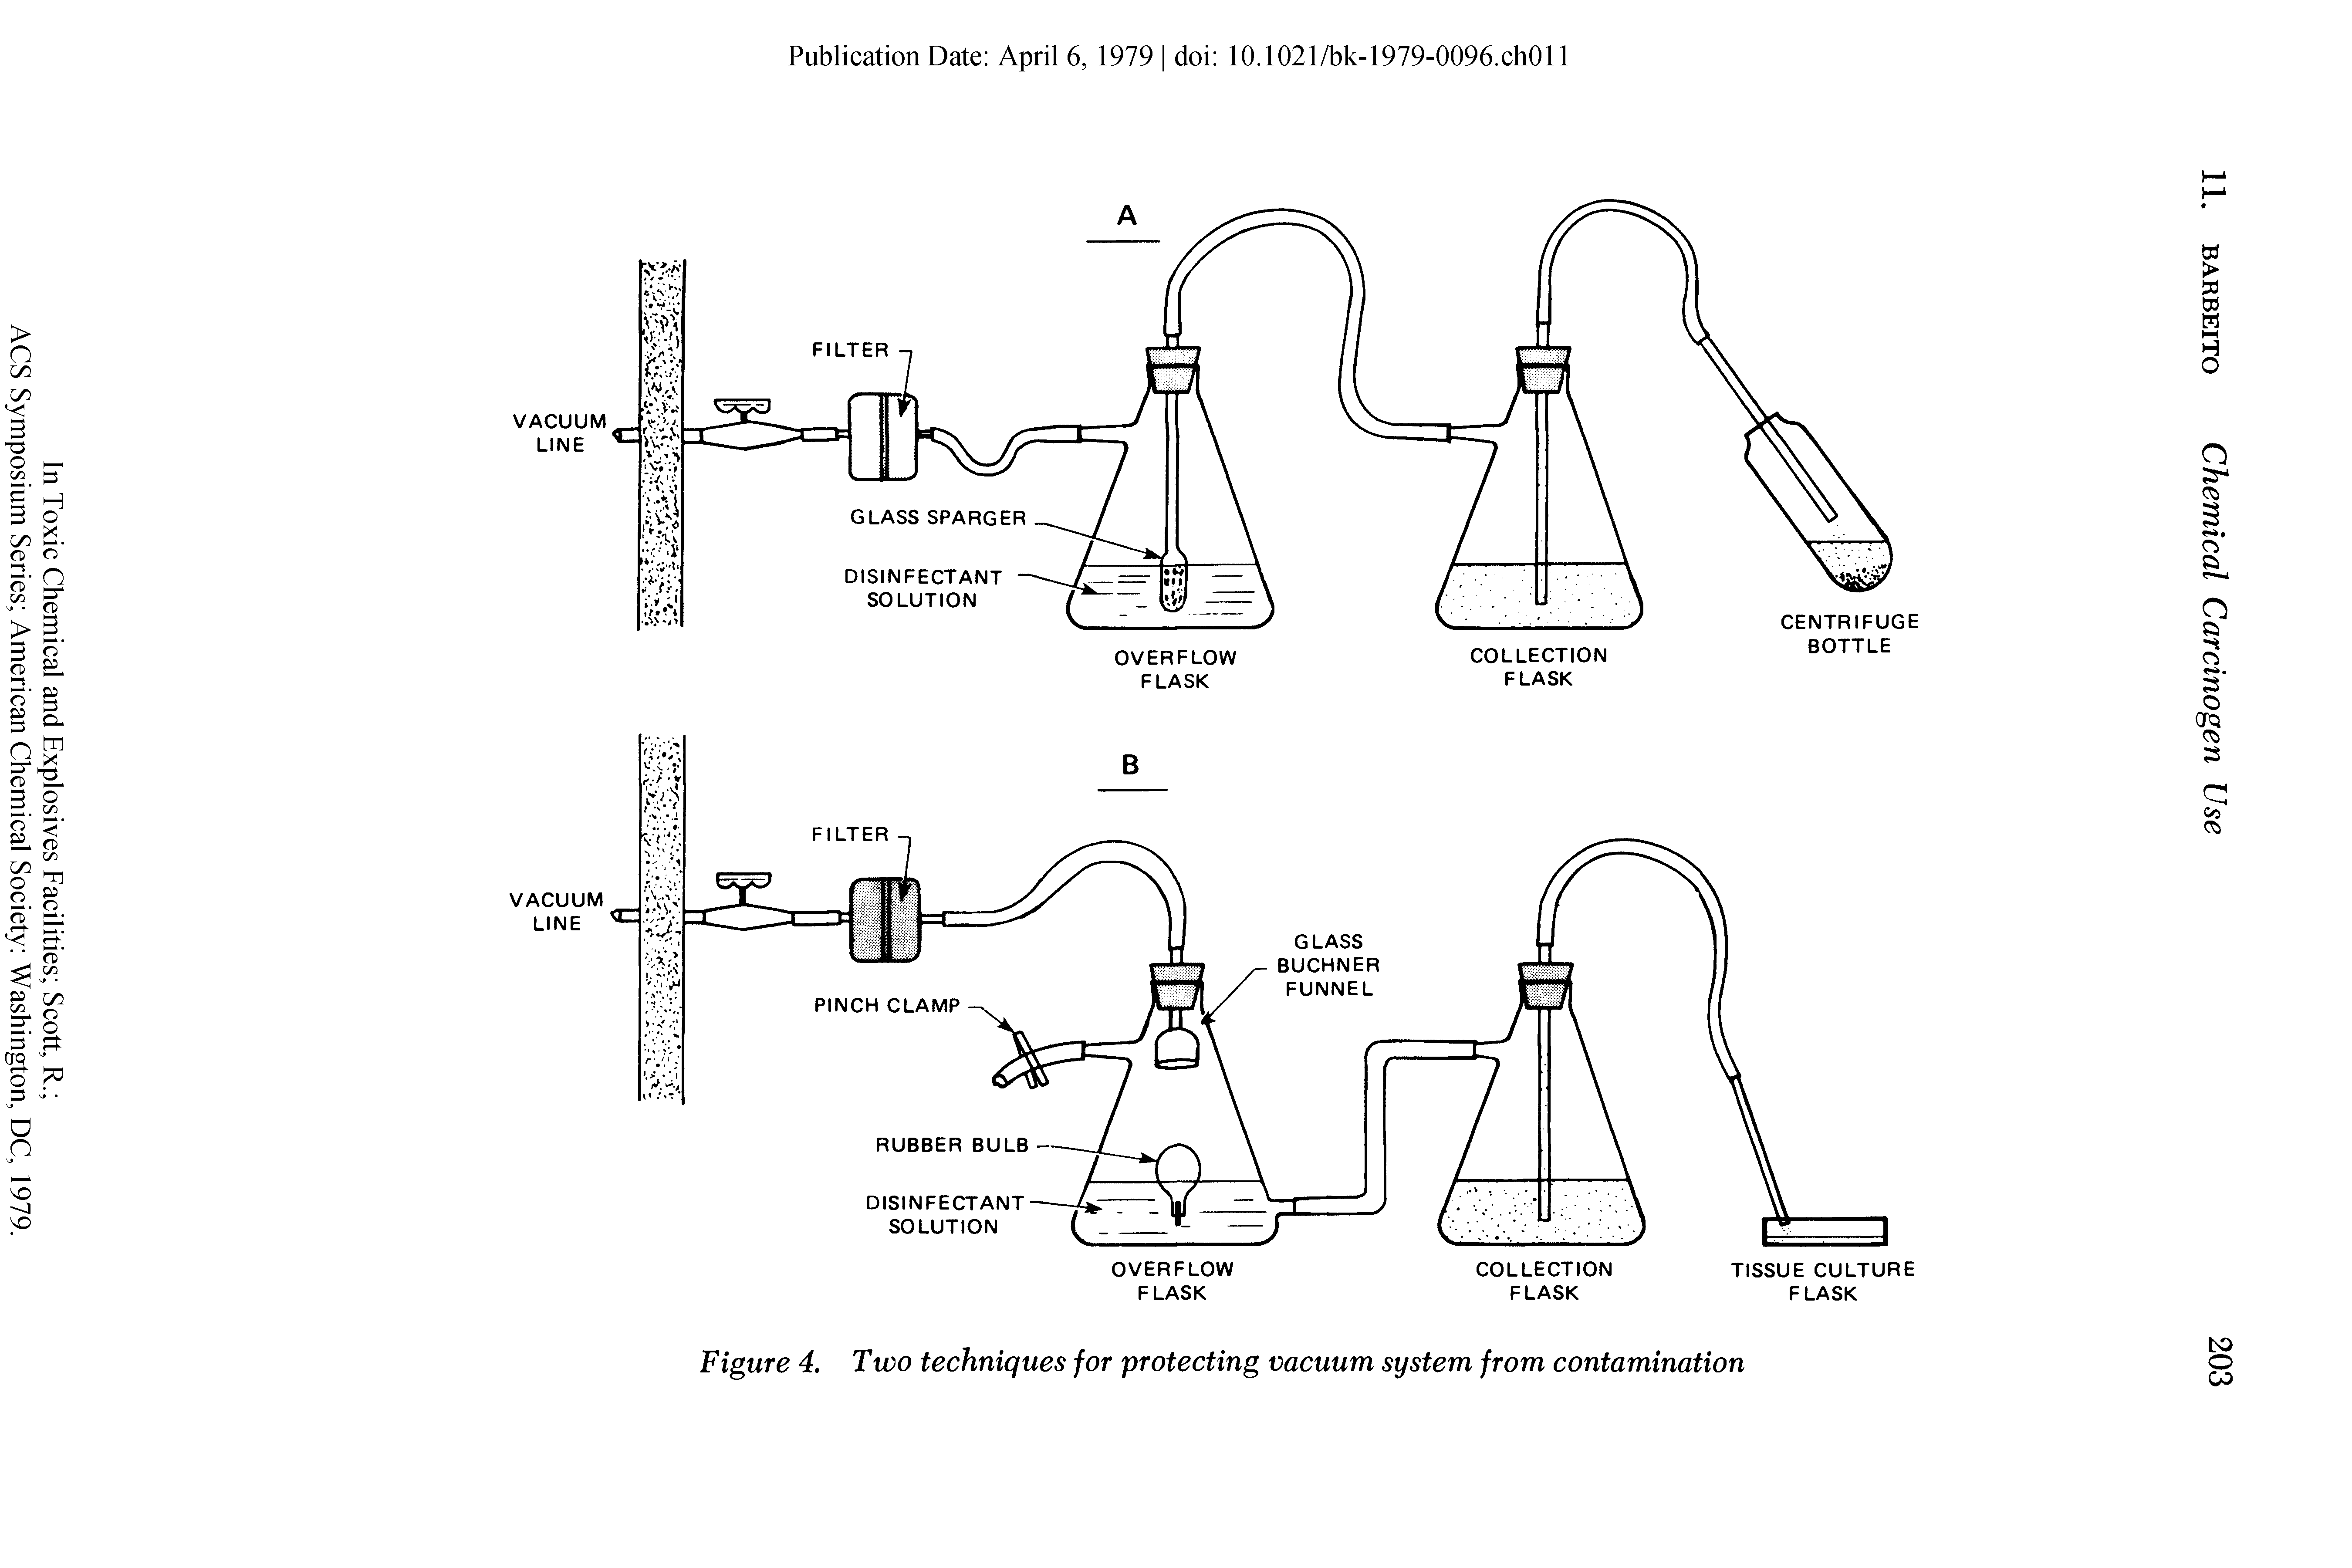 Figure 4. Two techniques for protecting vacuum system from contamination...